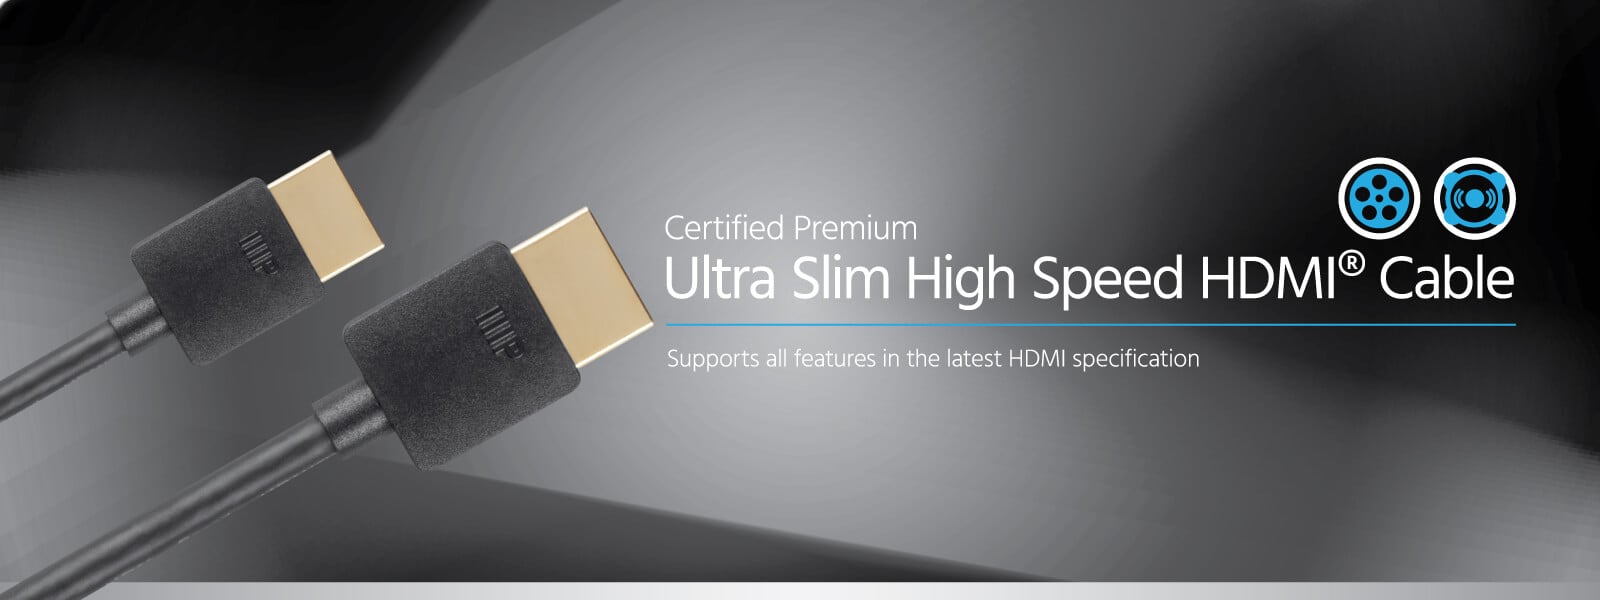 Certified Premium High Speed HDMI Cable